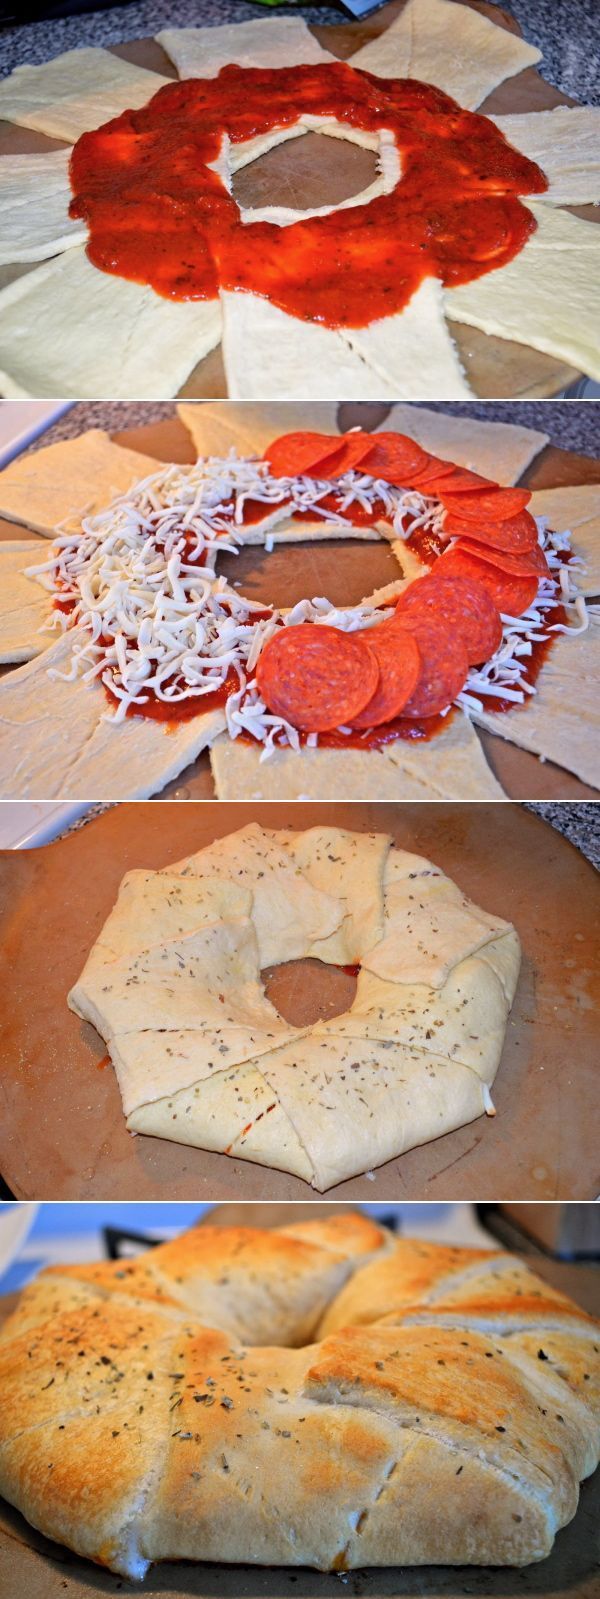 Pizza Ring made with Pillsbury Crescent Roll dough. Great appetizer for any party! And especially easy-looking to make if youre